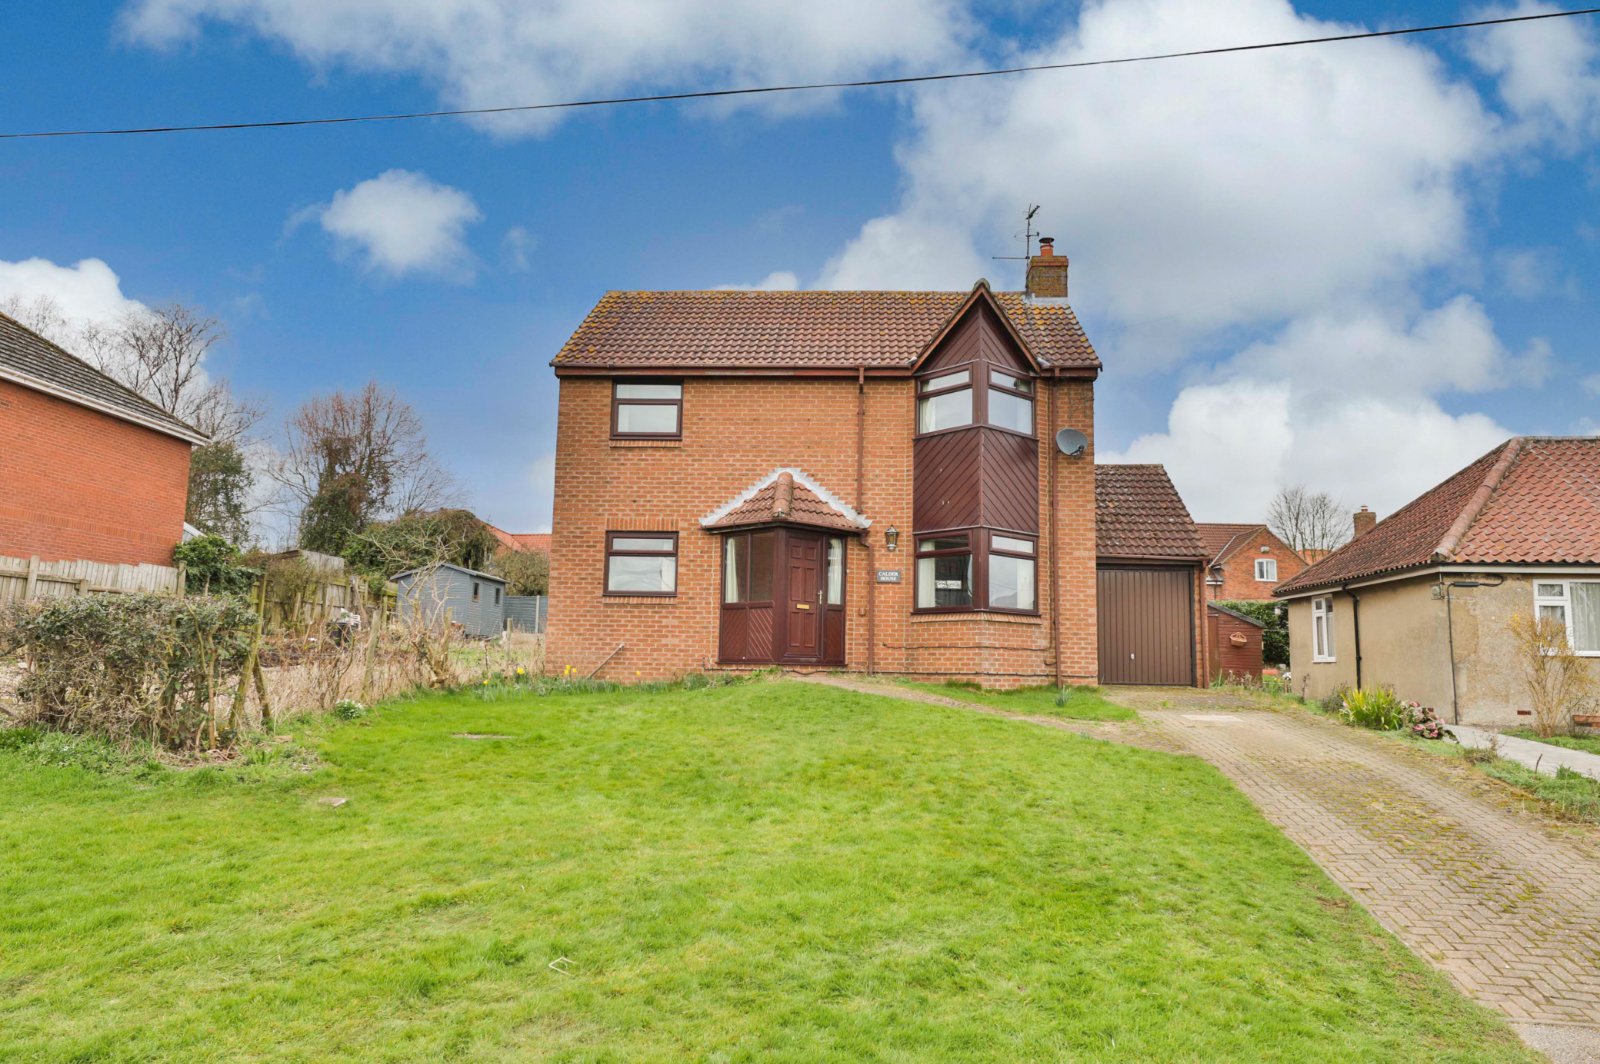 4 bed house for sale in Low Road, Everthorpe 0